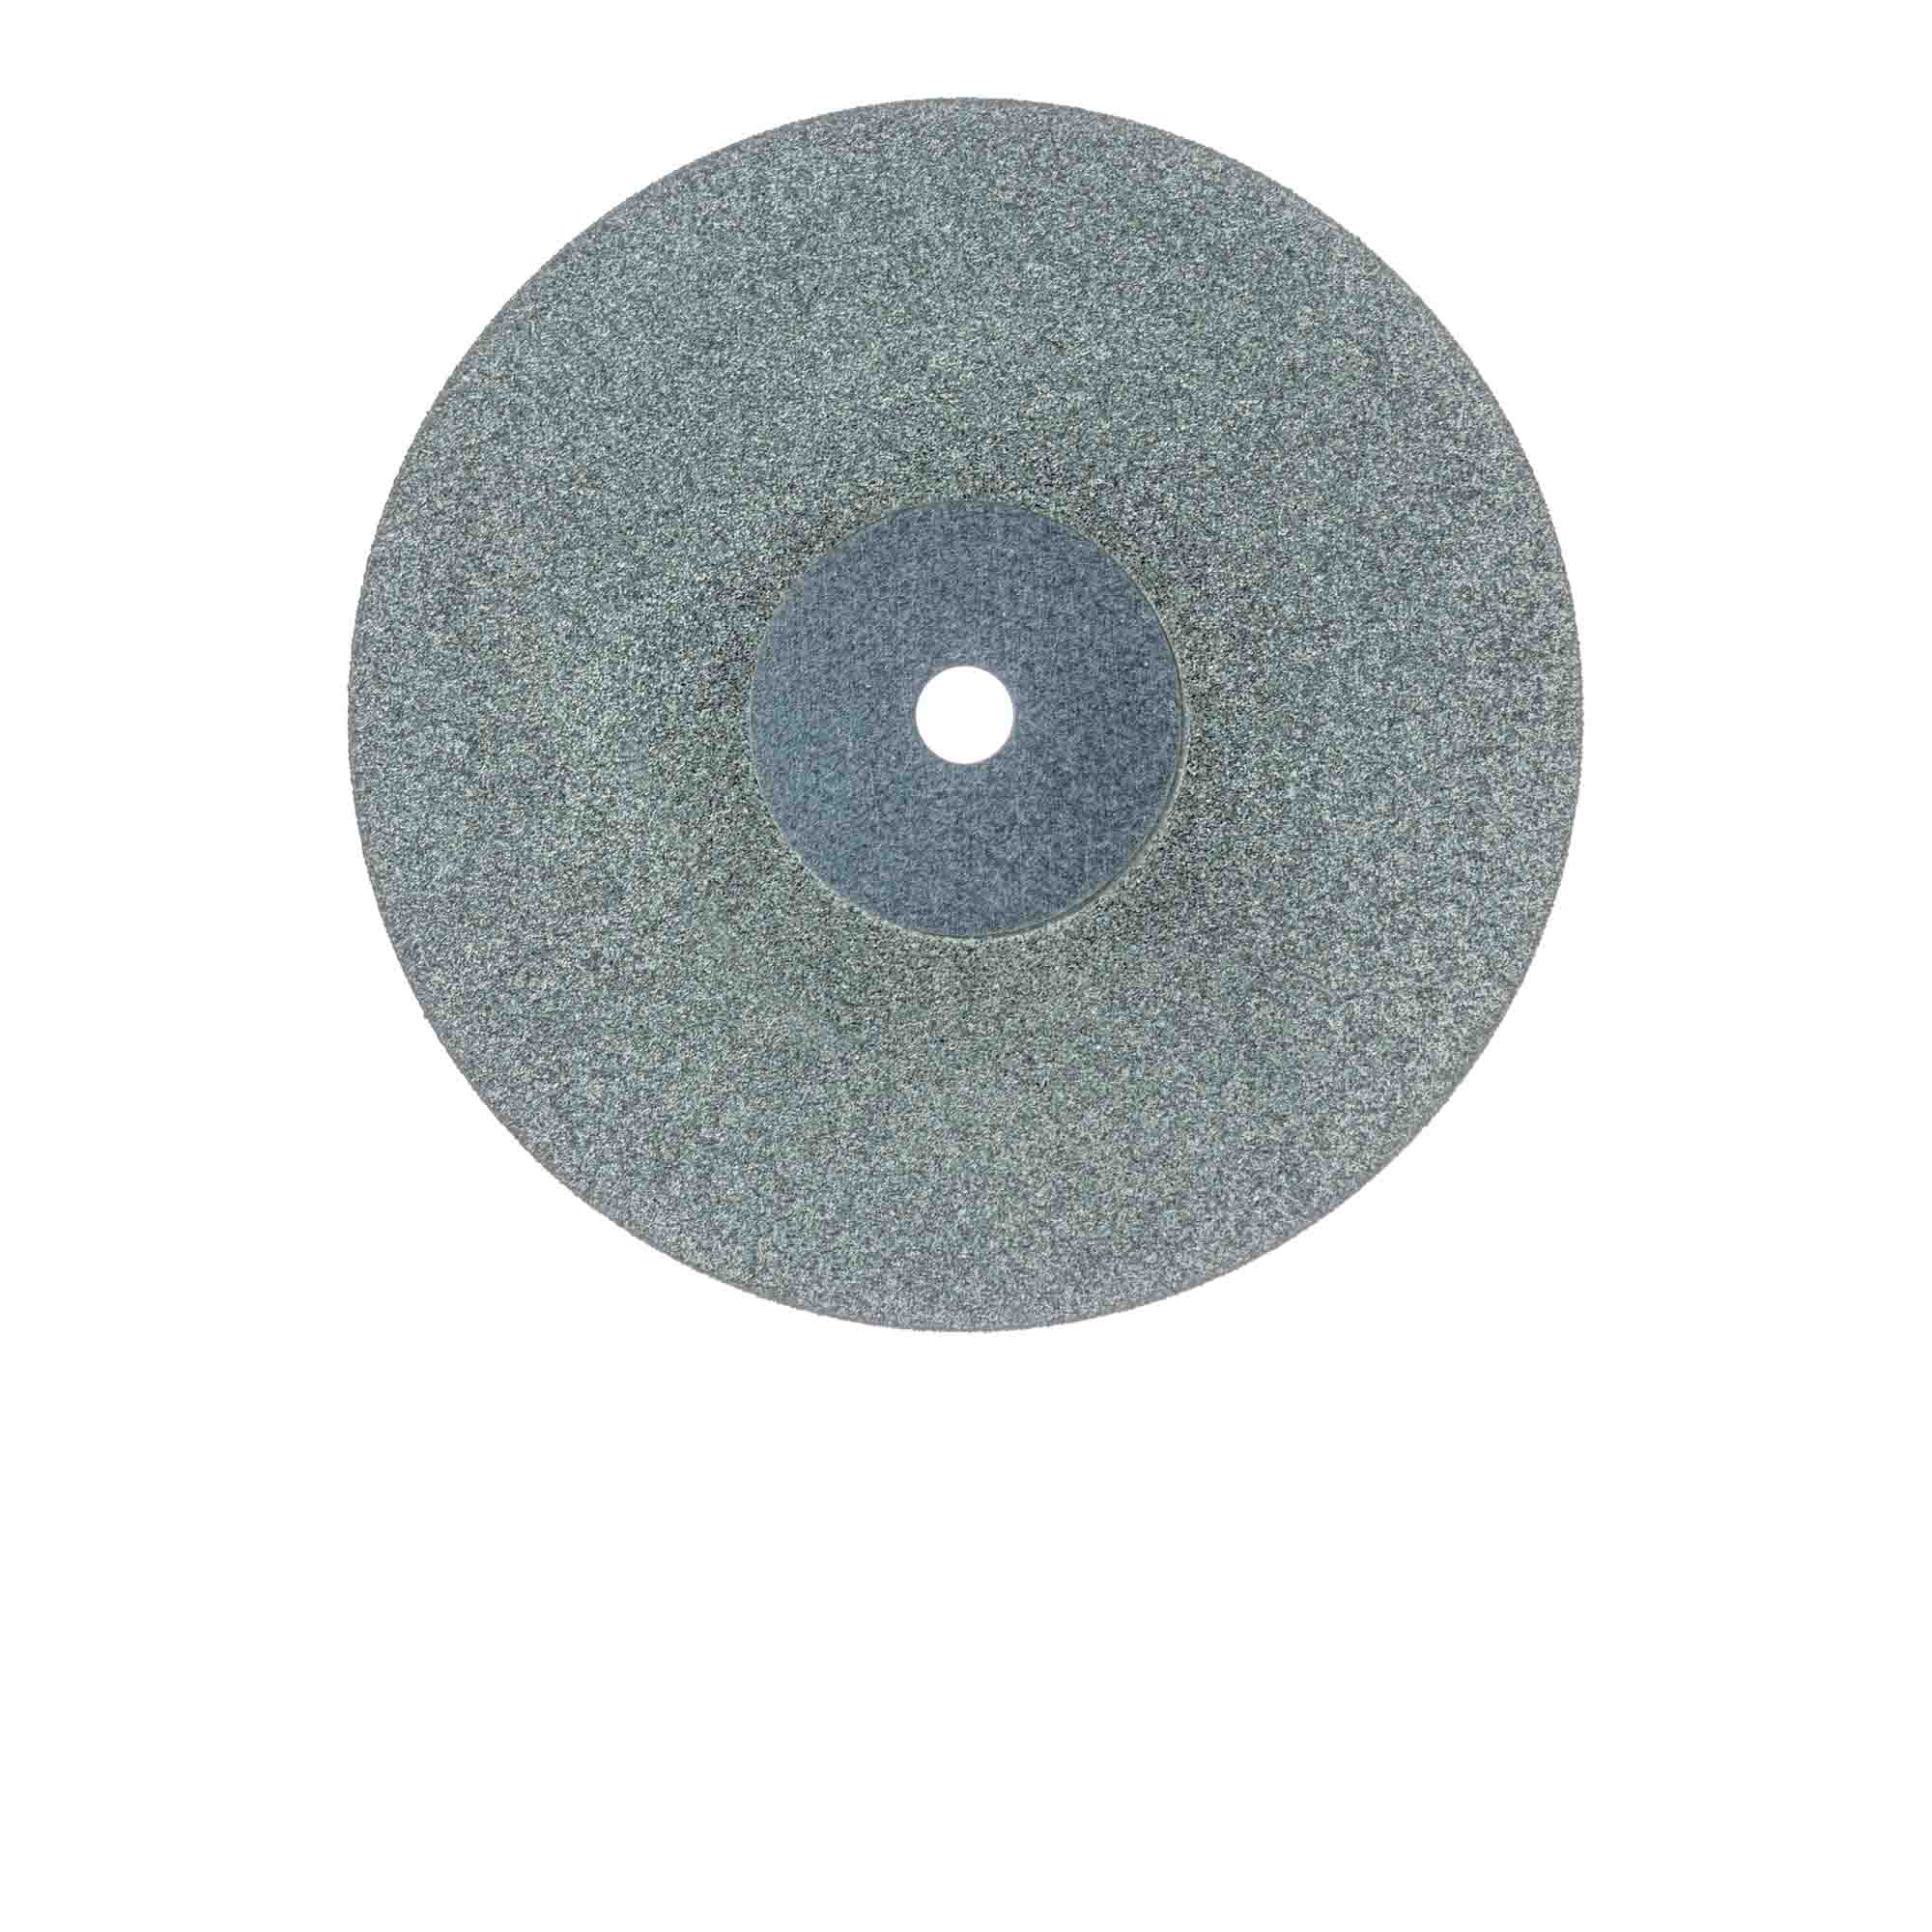 921DC-220-UNM Diamond Disc, Double Sided, 0.15mm Thick, 22mm Ø, Extra Fine, UNM